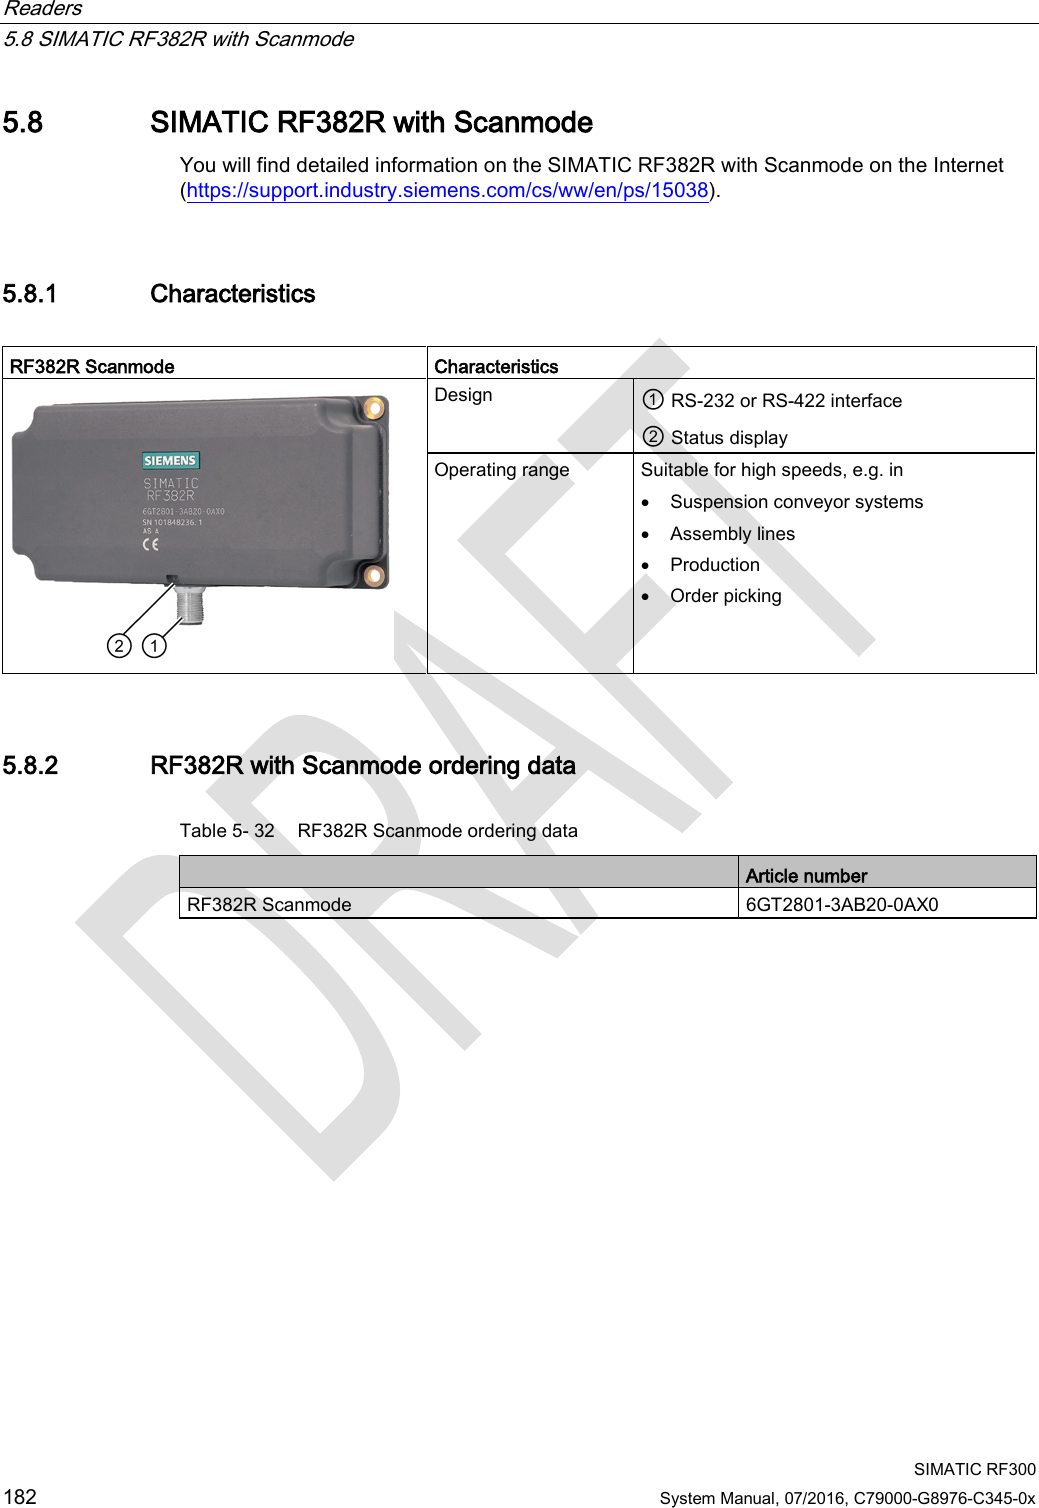 Readers   5.8 SIMATIC RF382R with Scanmode  SIMATIC RF300 182 System Manual, 07/2016, C79000-G8976-C345-0x 5.8 SIMATIC RF382R with Scanmode You will find detailed information on the SIMATIC RF382R with Scanmode on the Internet (https://support.industry.siemens.com/cs/ww/en/ps/15038). 5.8.1 Characteristics  RF382R Scanmode Characteristics  Design ① RS-232 or RS-422 interface ② Status display Operating range Suitable for high speeds, e.g. in  • Suspension conveyor systems • Assembly lines • Production • Order picking 5.8.2 RF382R with Scanmode ordering data Table 5- 32 RF382R Scanmode ordering data  Article number RF382R Scanmode 6GT2801-3AB20-0AX0 